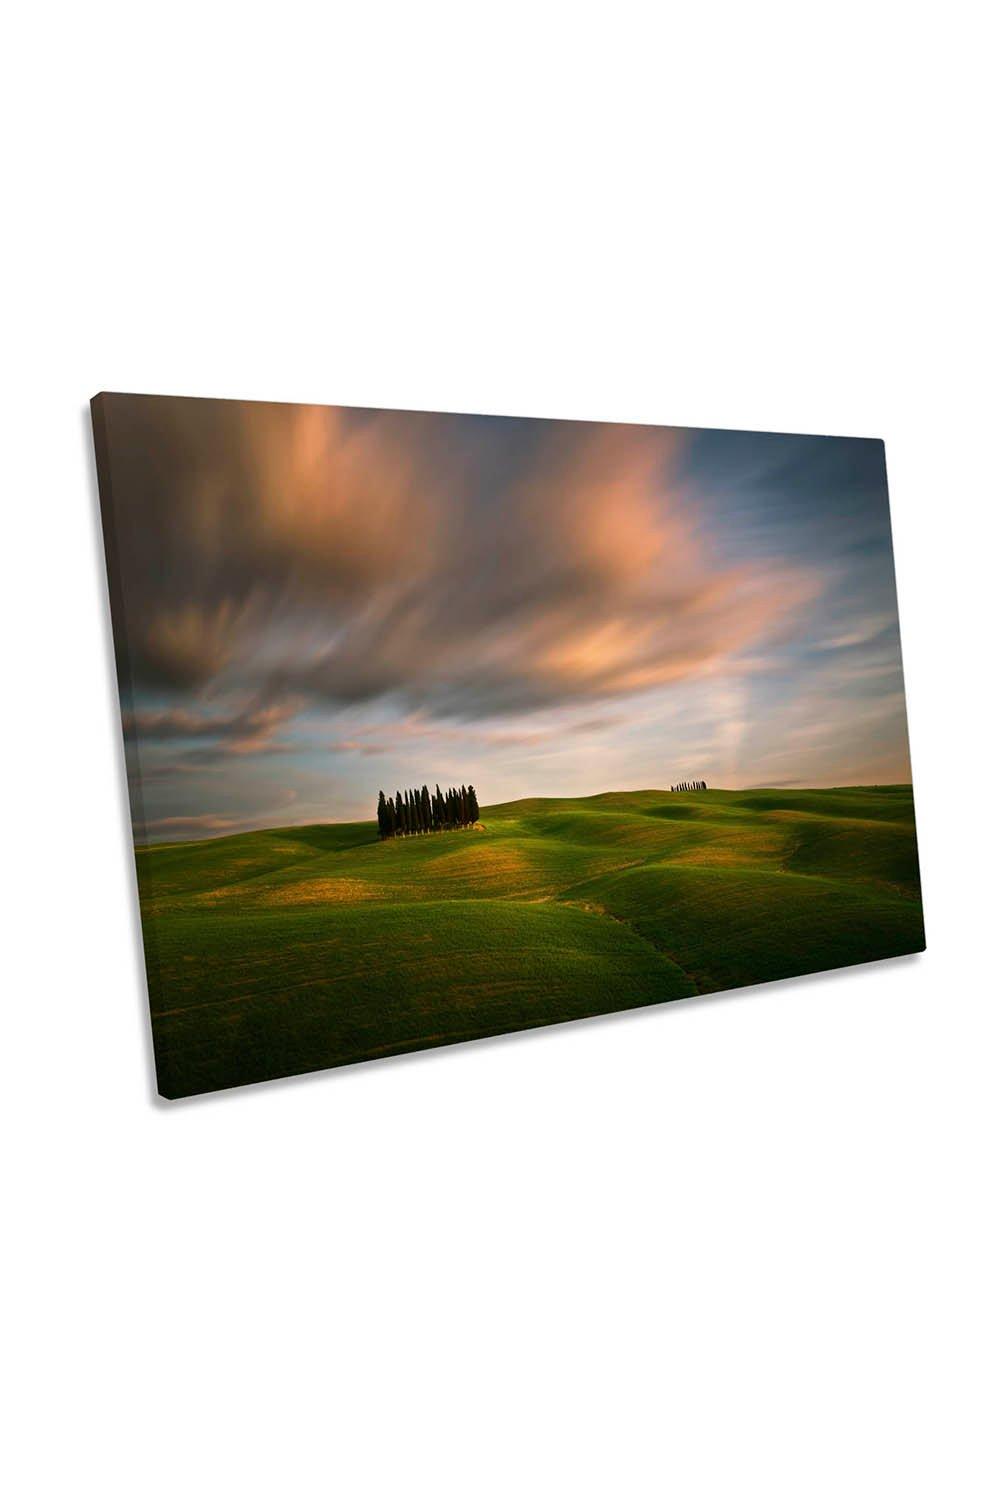 Tuscany Italy Fields Landscape Canvas Wall Art Picture Print